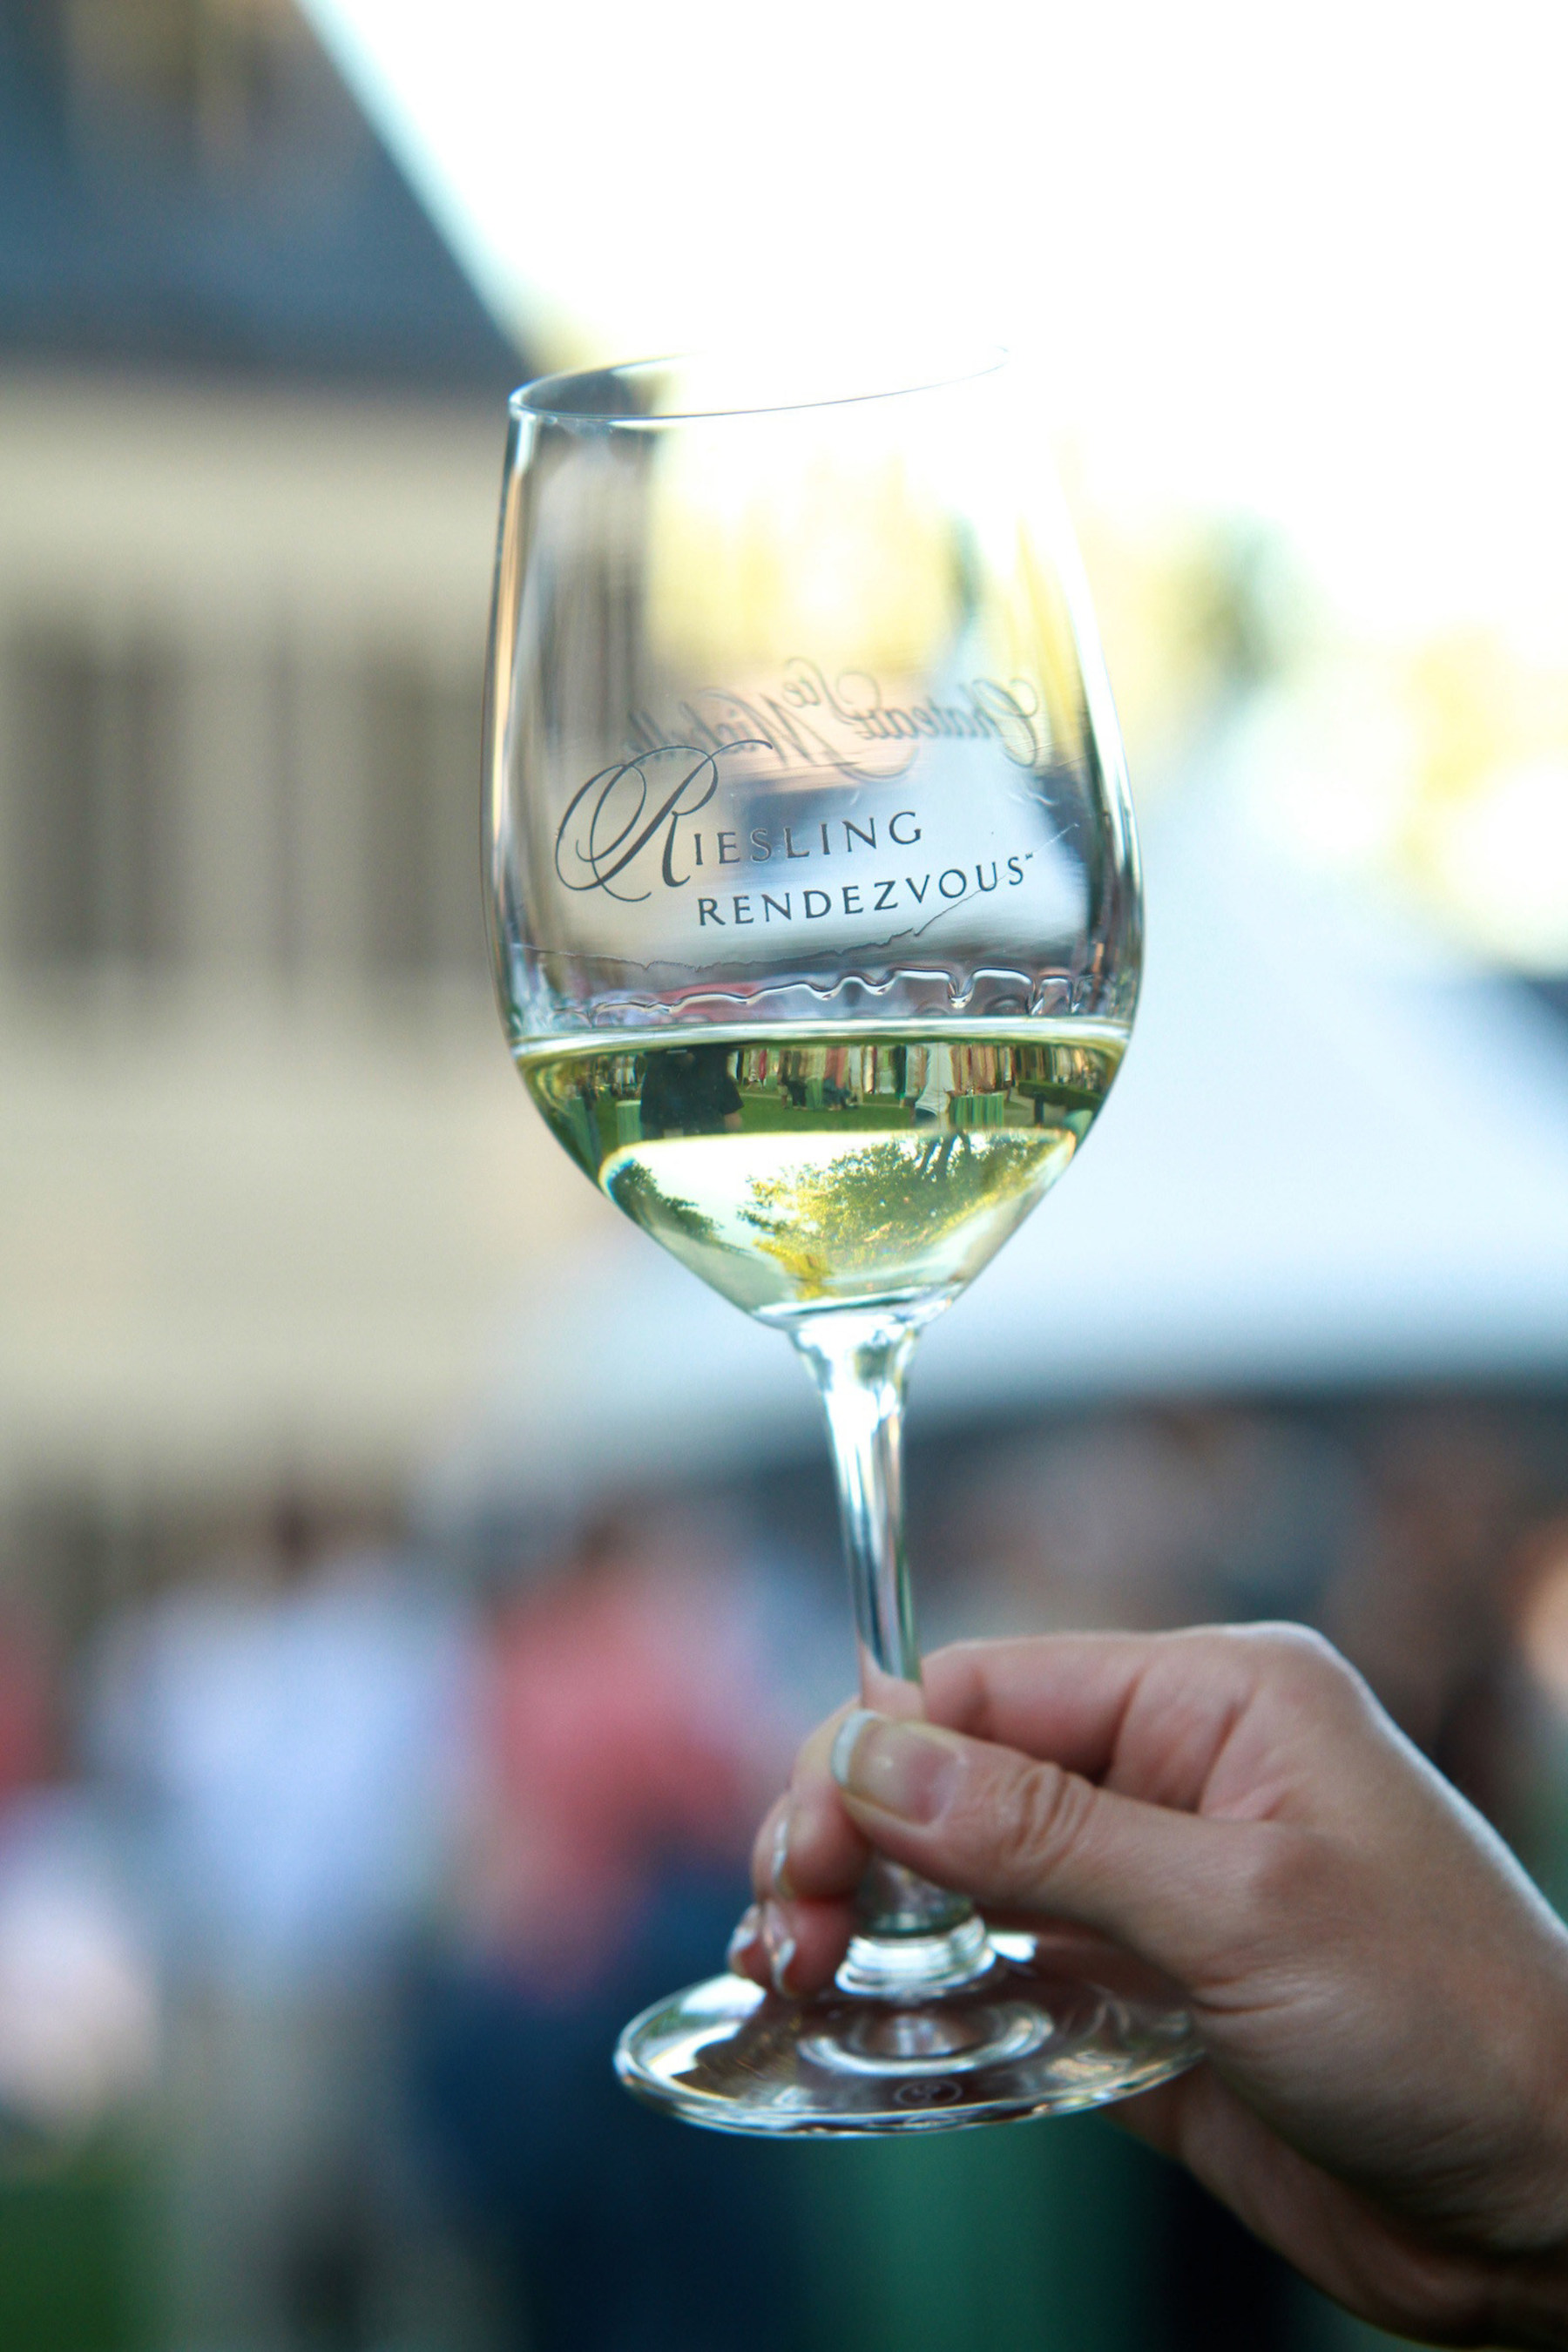 Winemakers from seven countries will converge at Riesling Rendezvous in Seattle on July 17th, giving wine lovers an unprecedented opportunity to explore the finest Rieslings from around the world in one location.